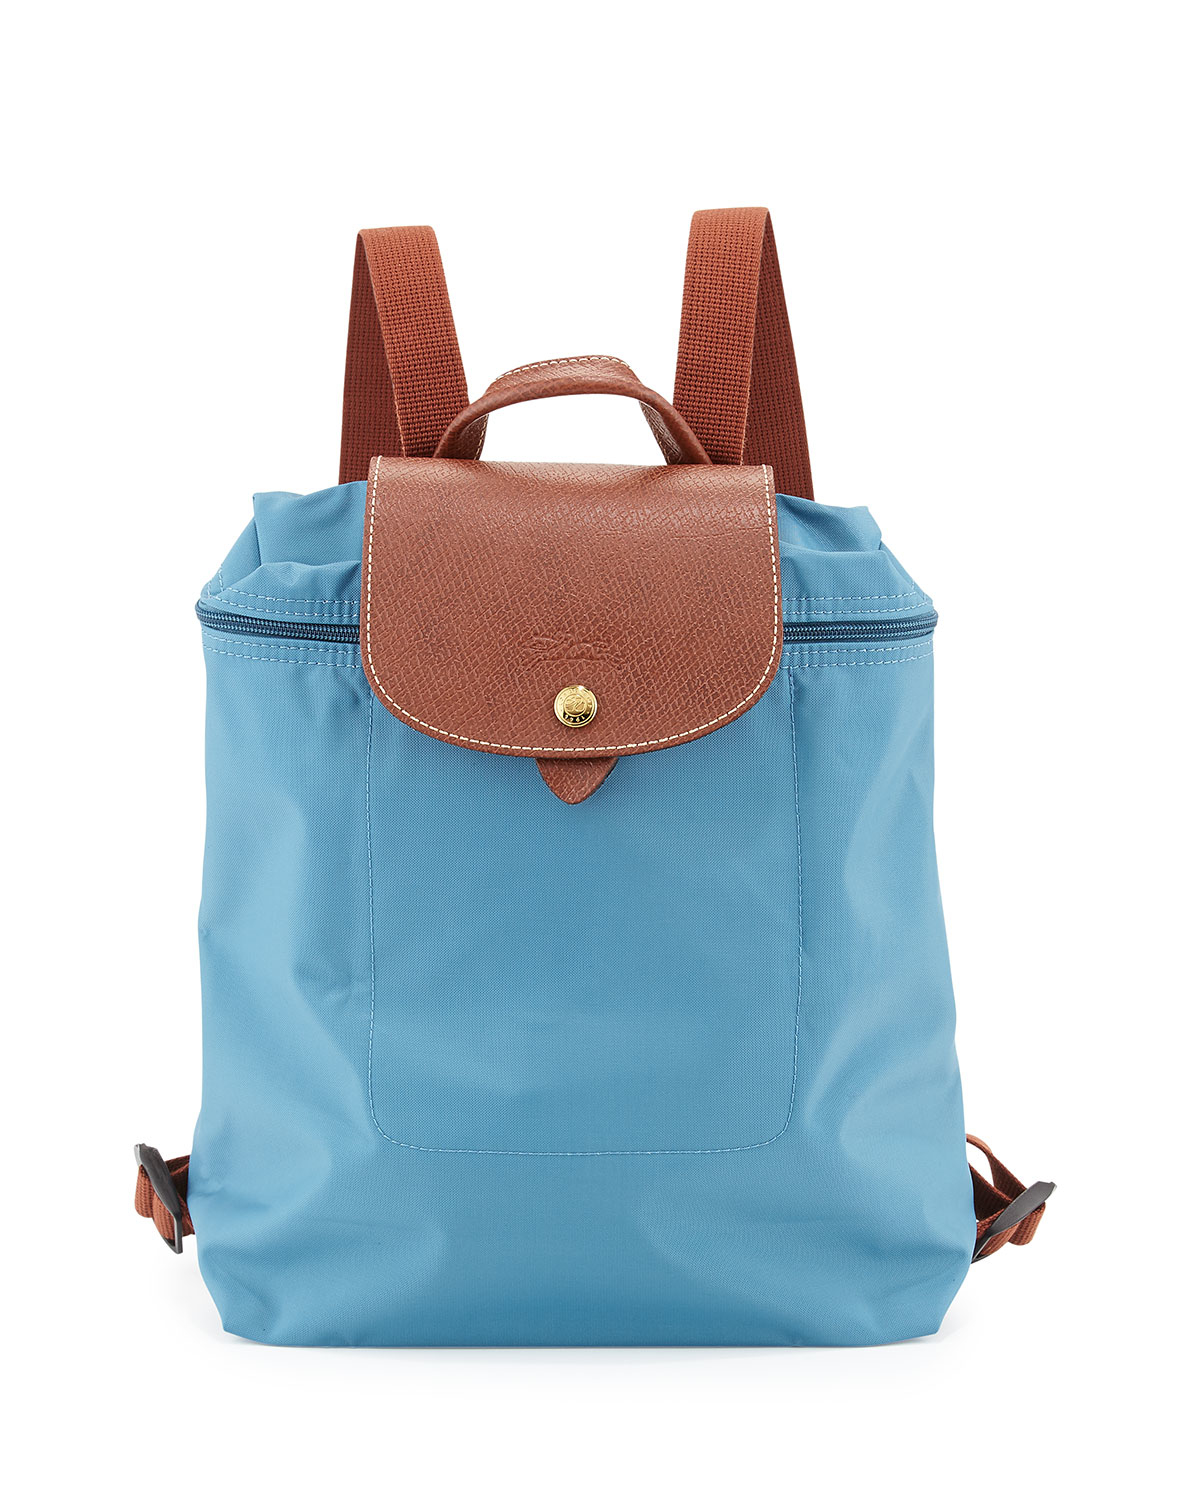 Lyst - Longchamp Le Pliage Nylon Backpack in Blue